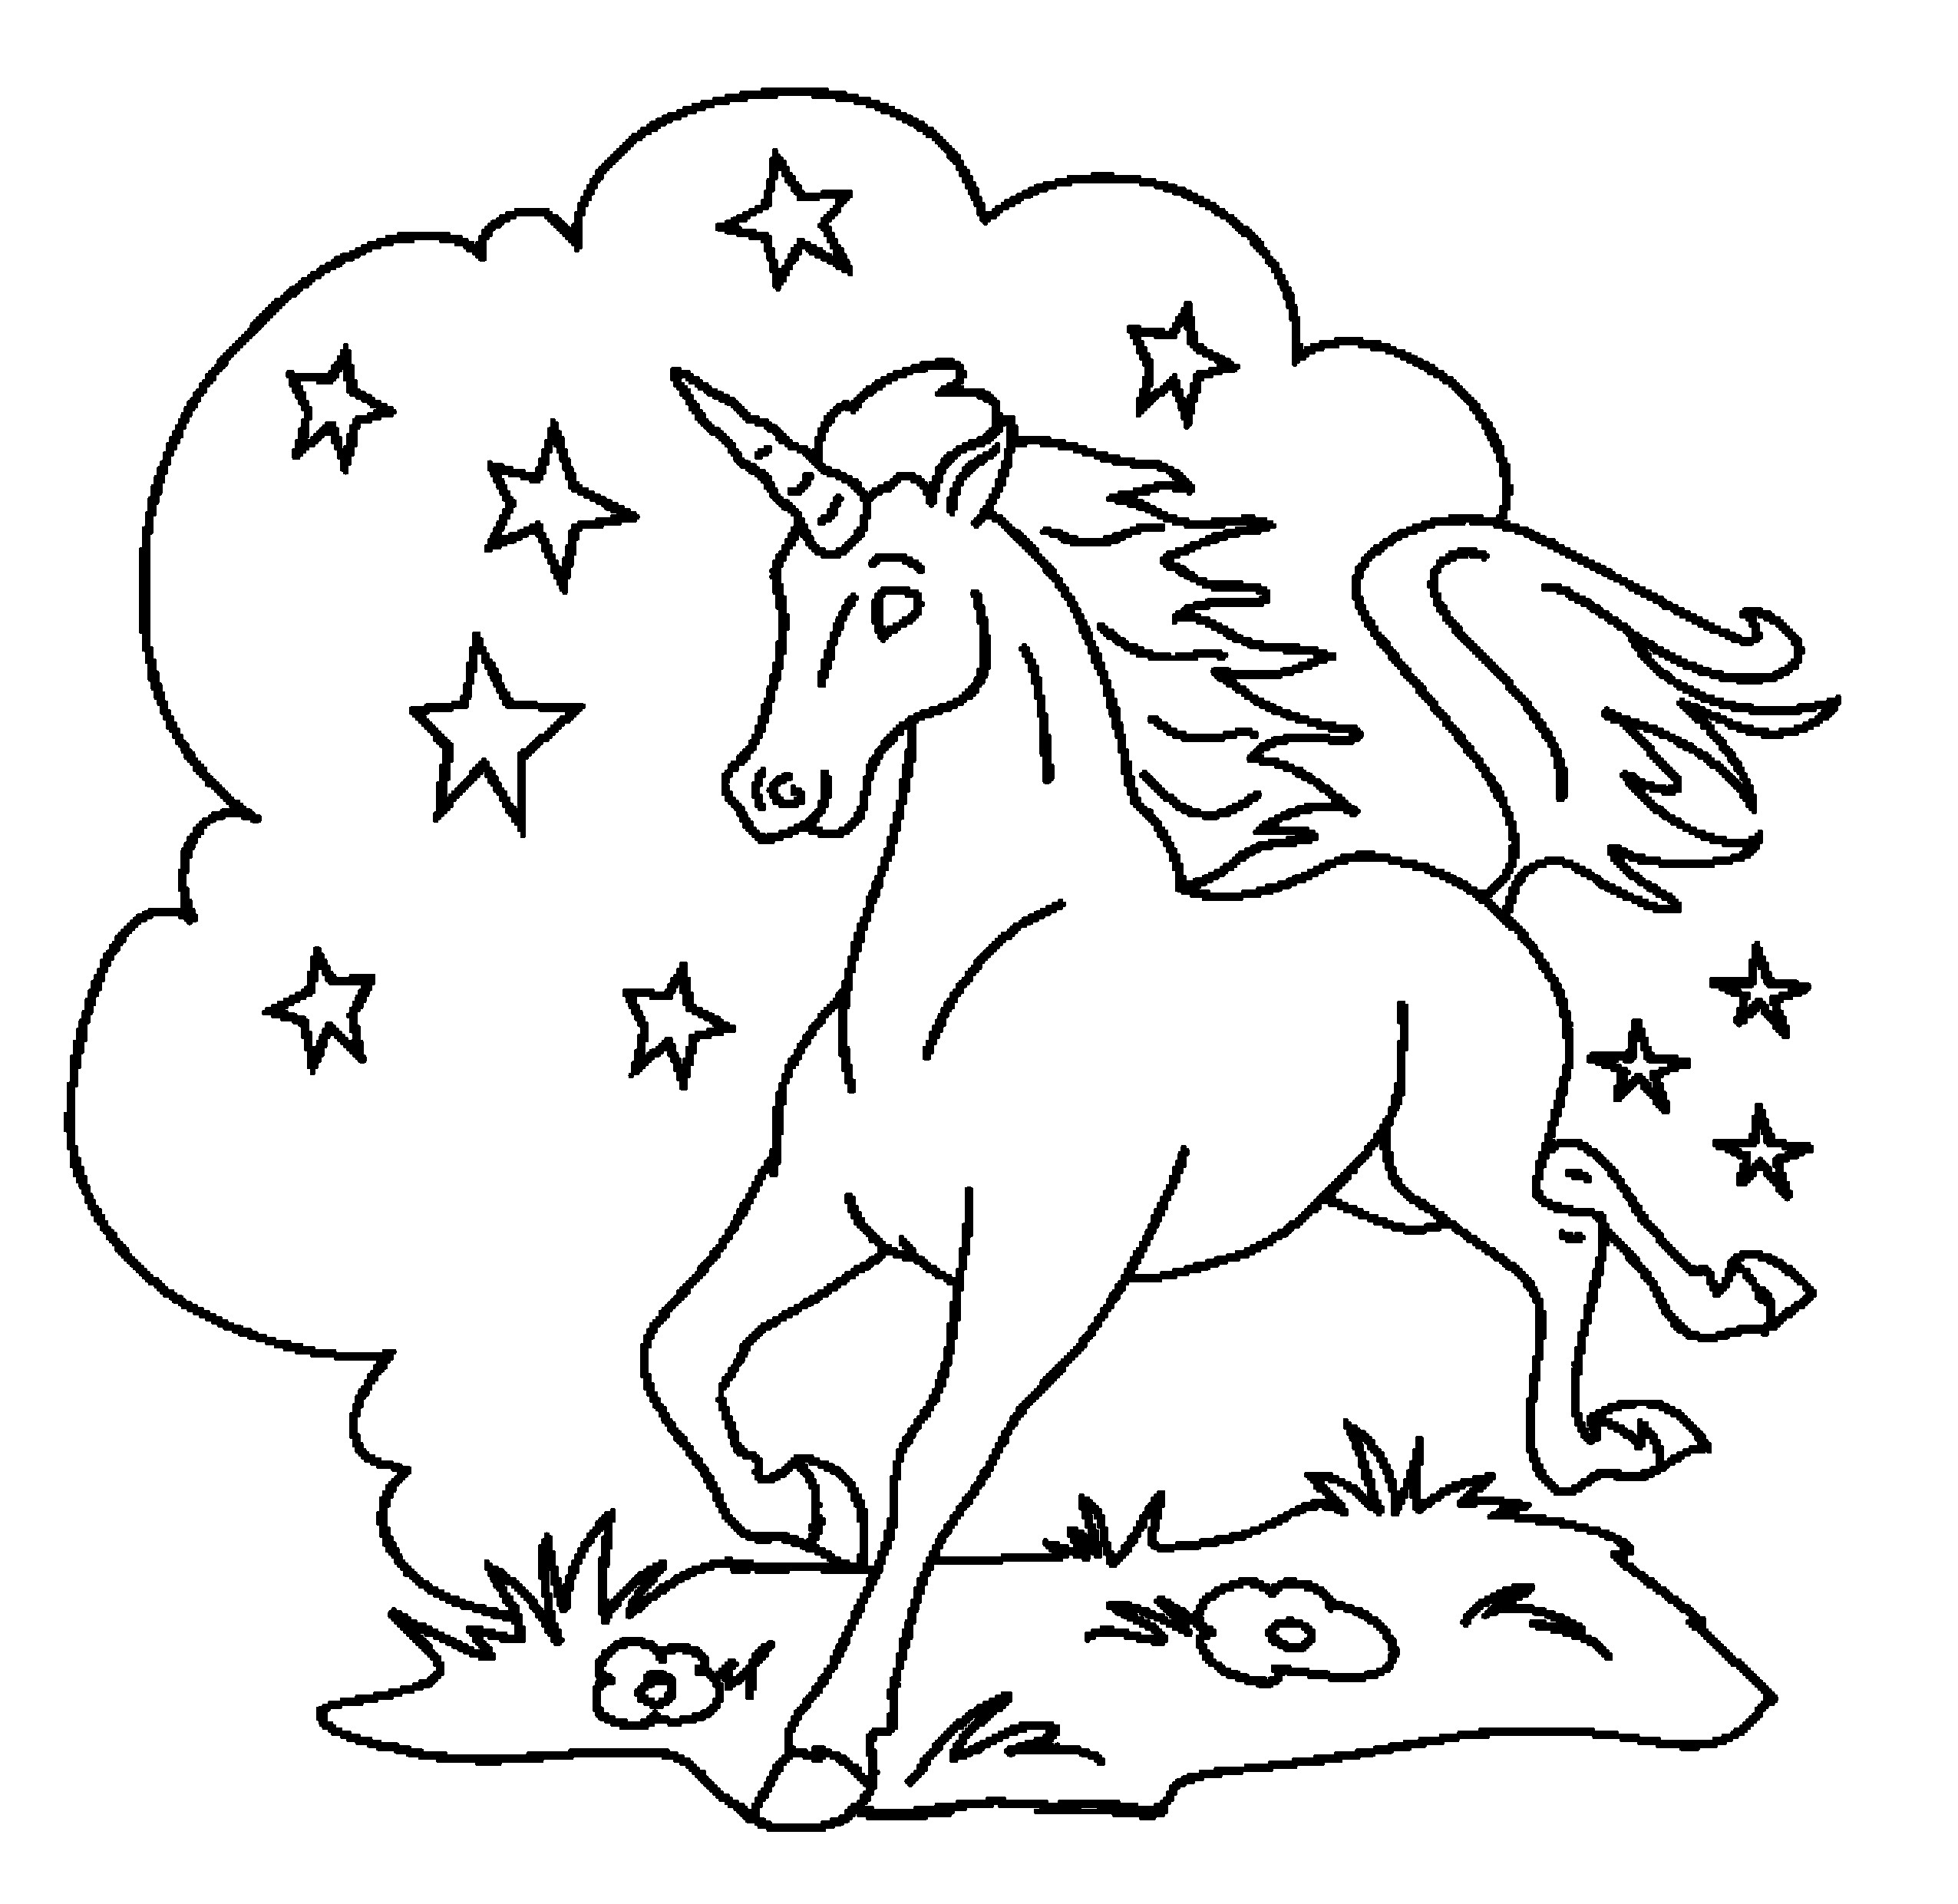 Unicorns Coloring Pages For Kids
 Print & Download Unicorn Coloring Pages for Children